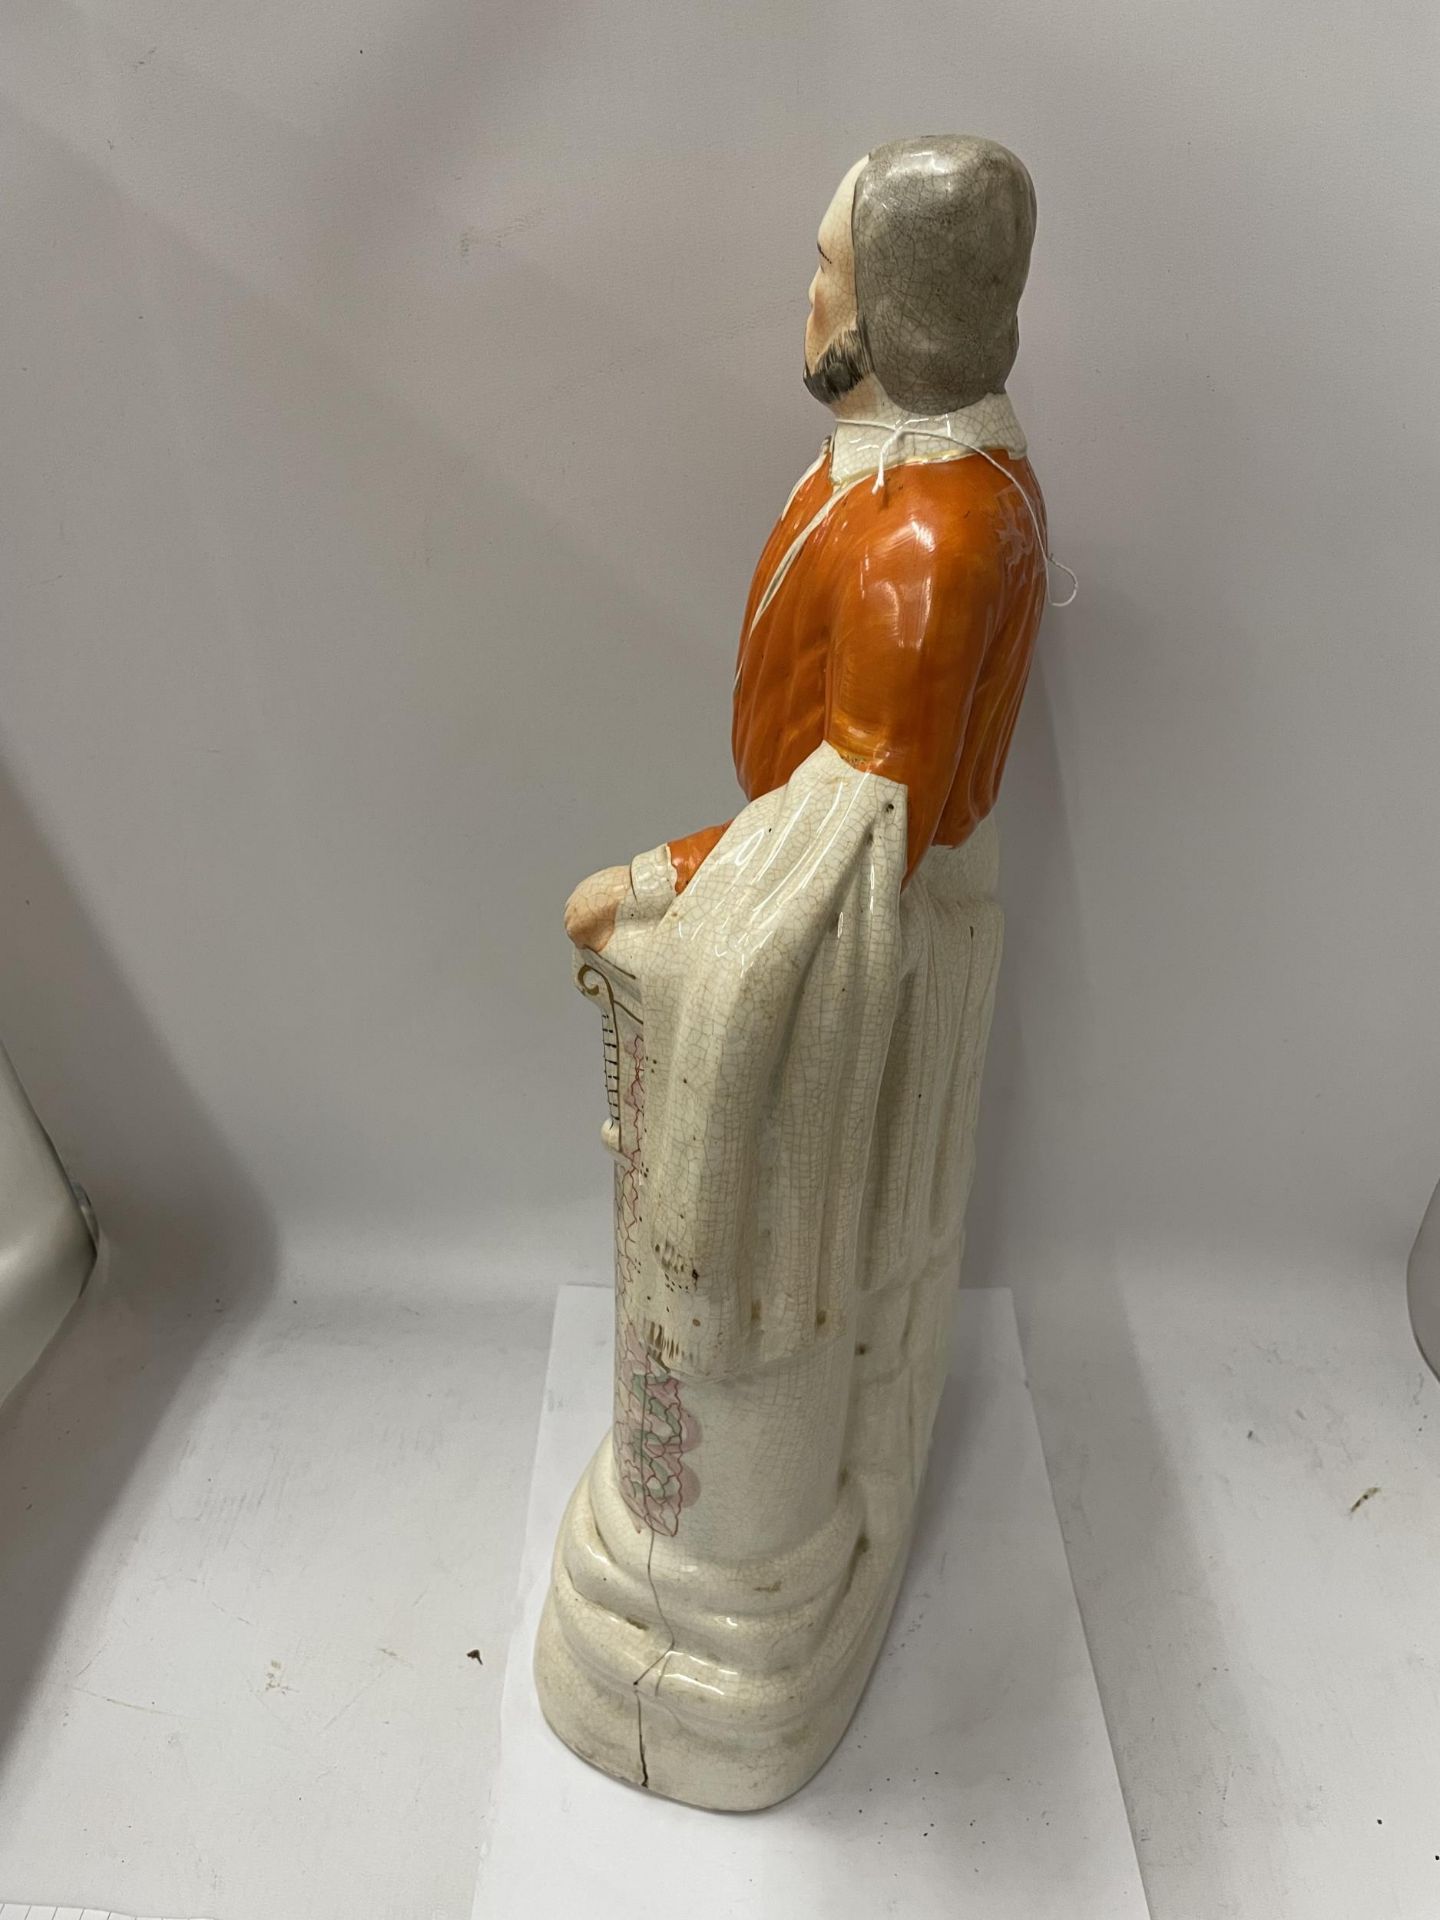 A LARGE STAFFORDSHIRE POTTERY FIGURE OF GARIBALDI HEIGHT 48CM - Image 2 of 3